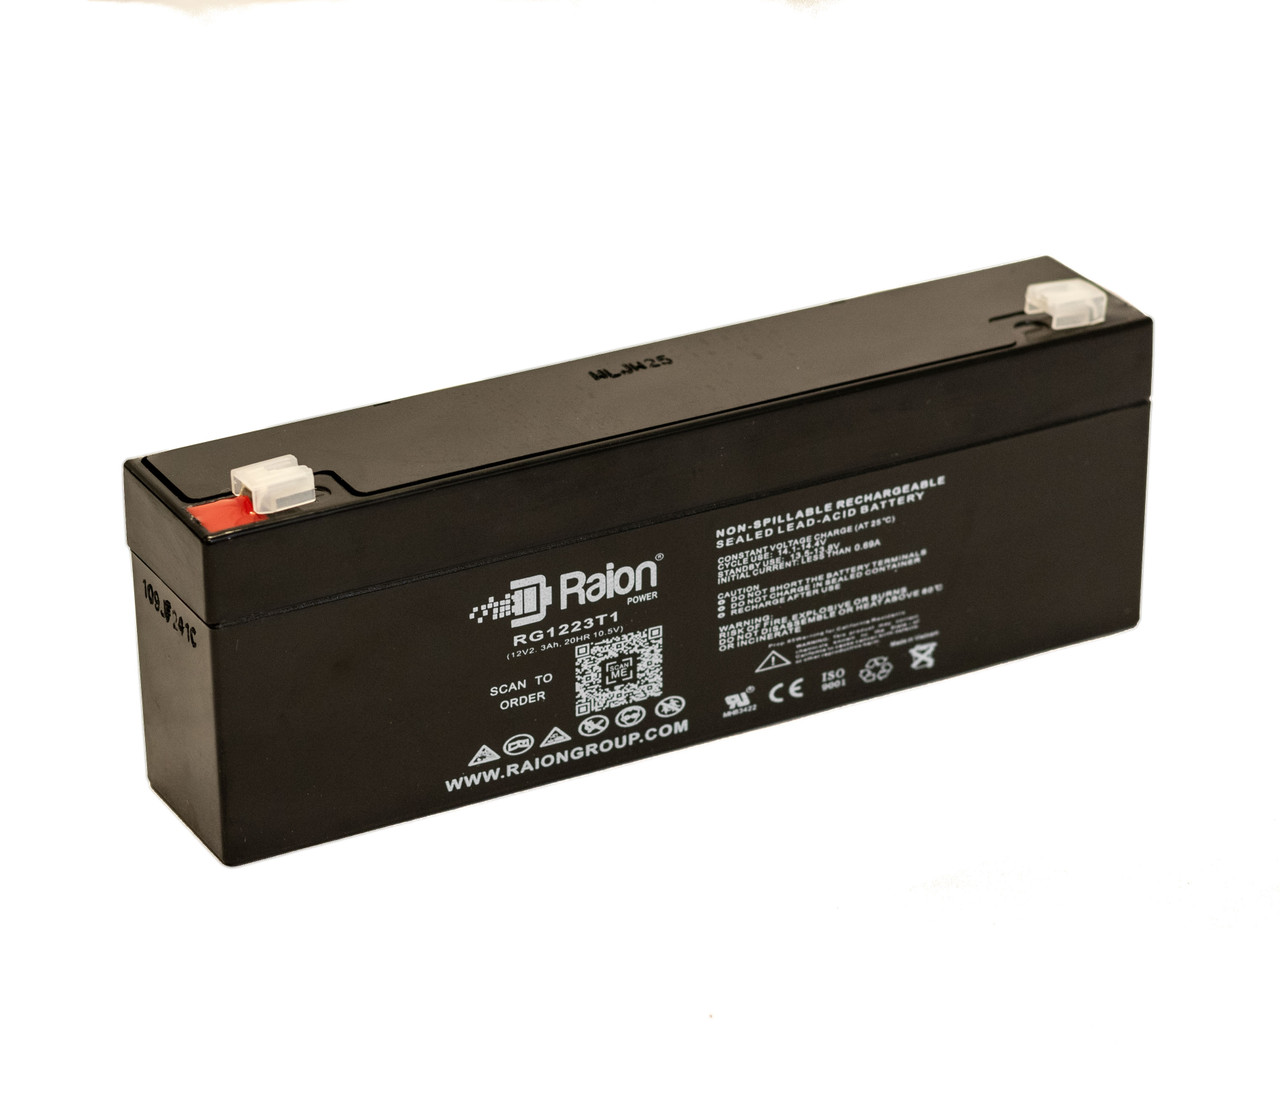 Raion Power RG1223T1 Replacement Battery for Powersonic PS-1229